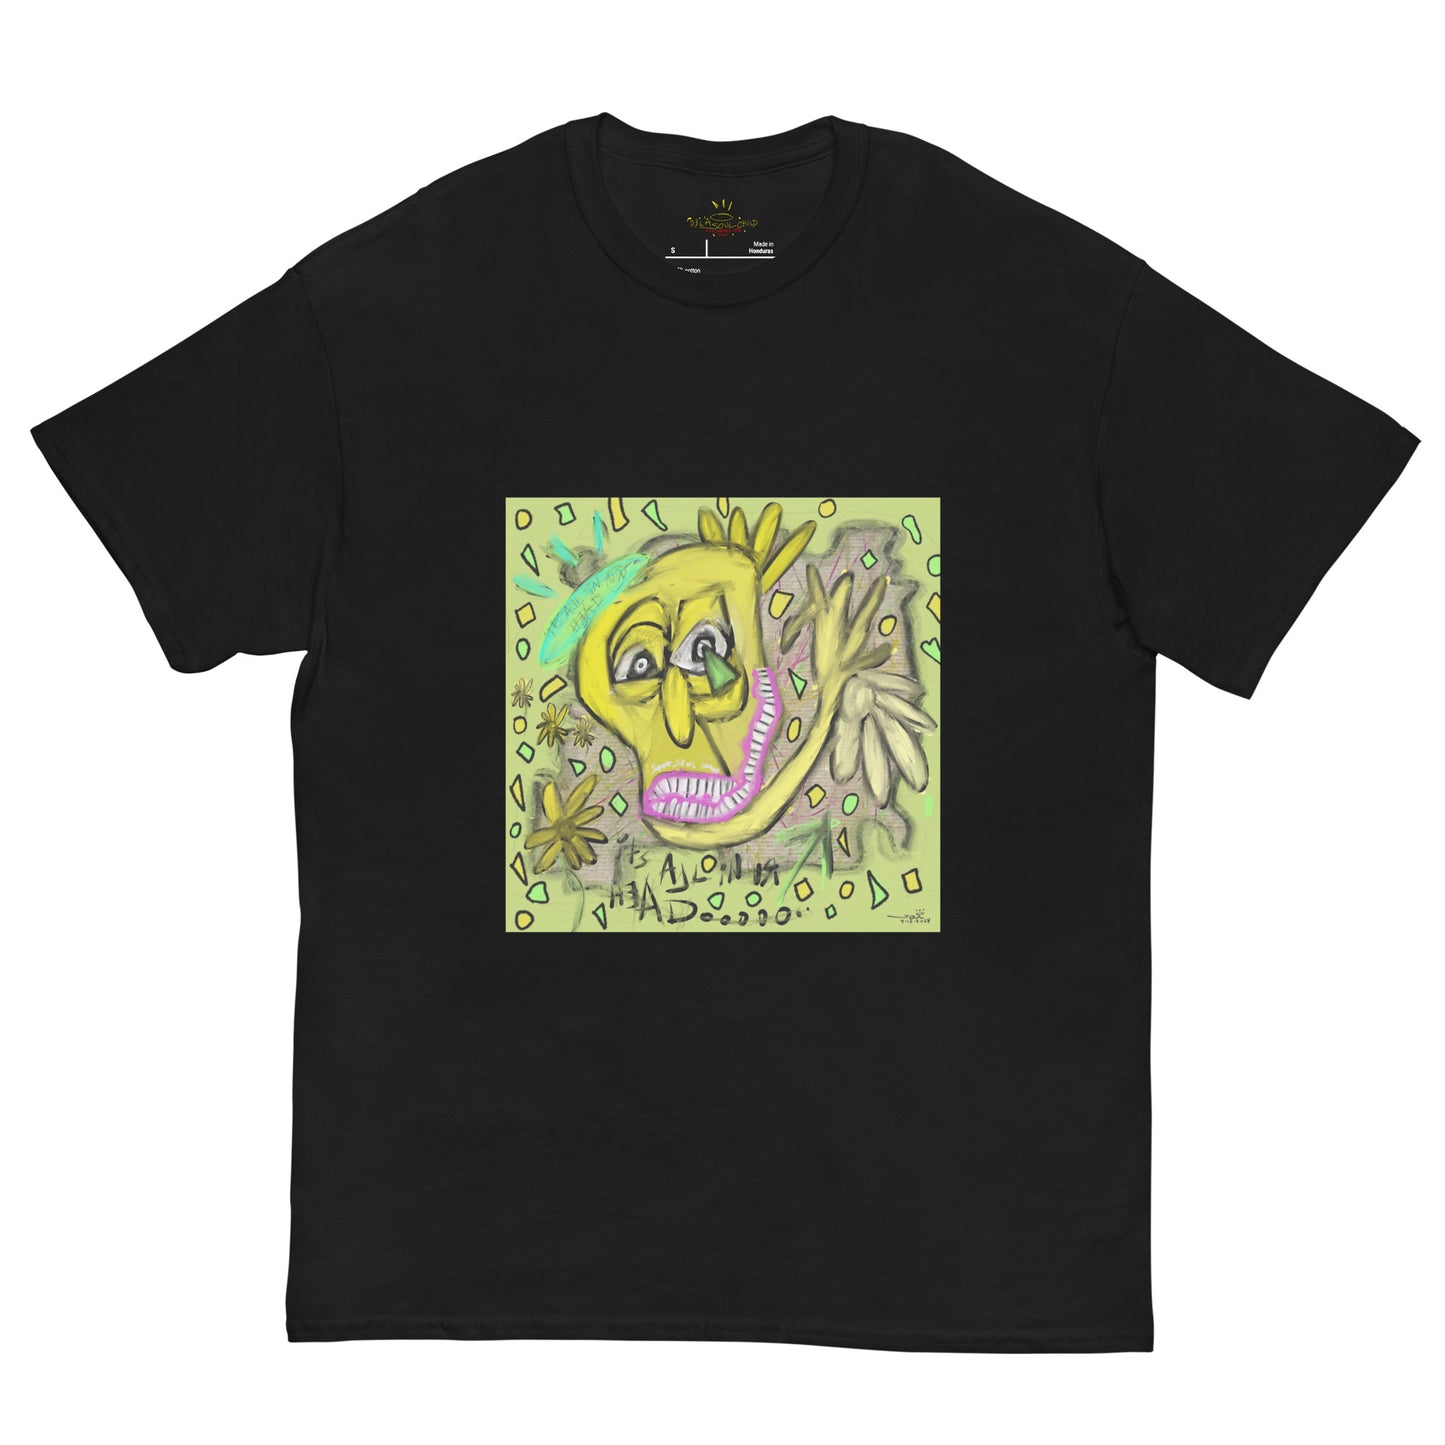 It's All in Your Head #1 - Collectible T-Shirt - Based off the original 1/1 Solana NFT Print